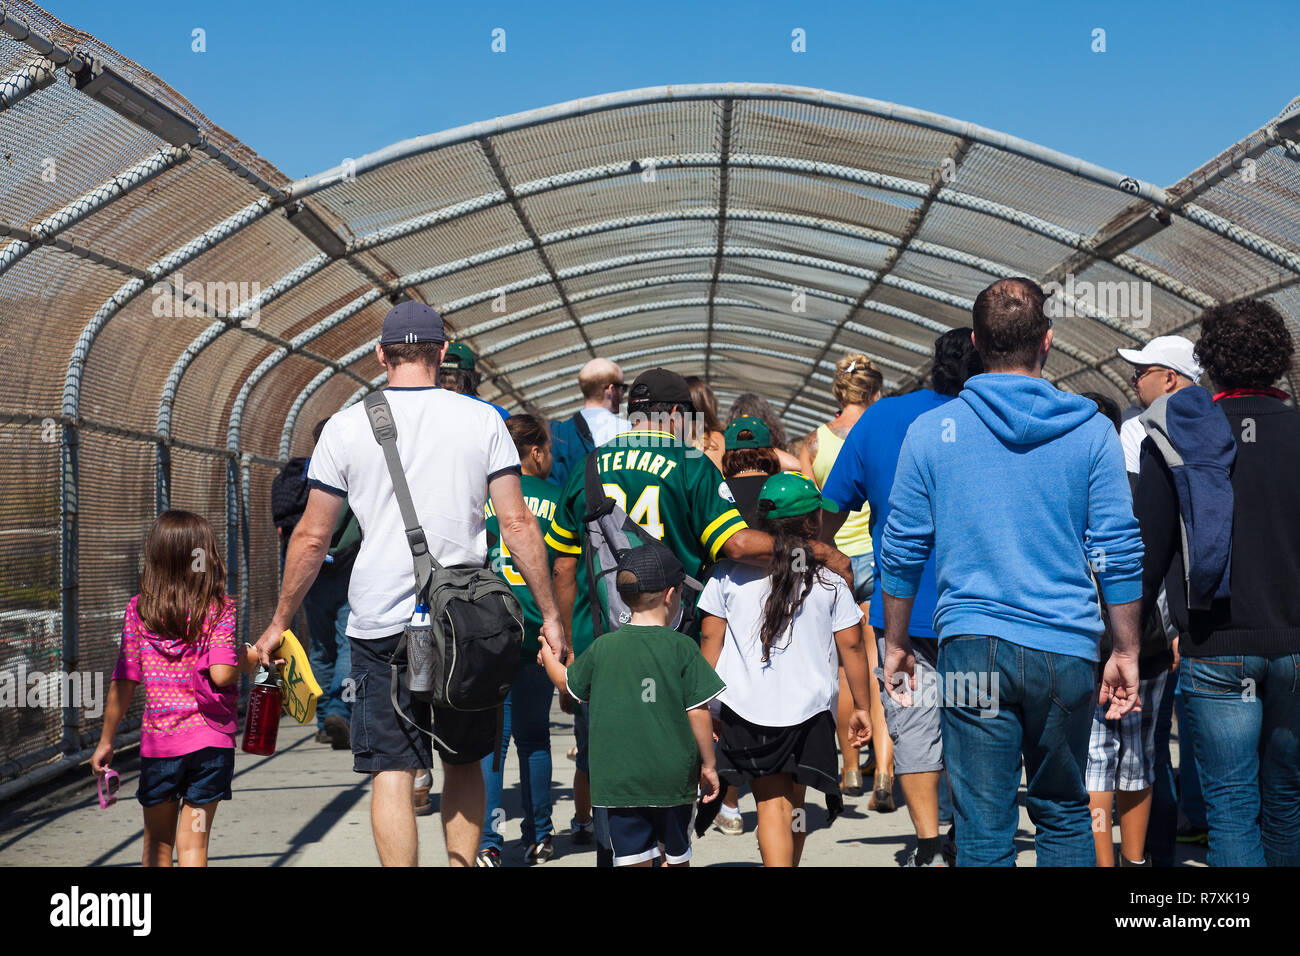 OAKLAND, CA-Aug. 22, 2012: Happy baseball fans leave the stadium after the Oakland Athletics beat the Minnesota Twins 5-1 on a sunny summer afternoon. Stock Photo